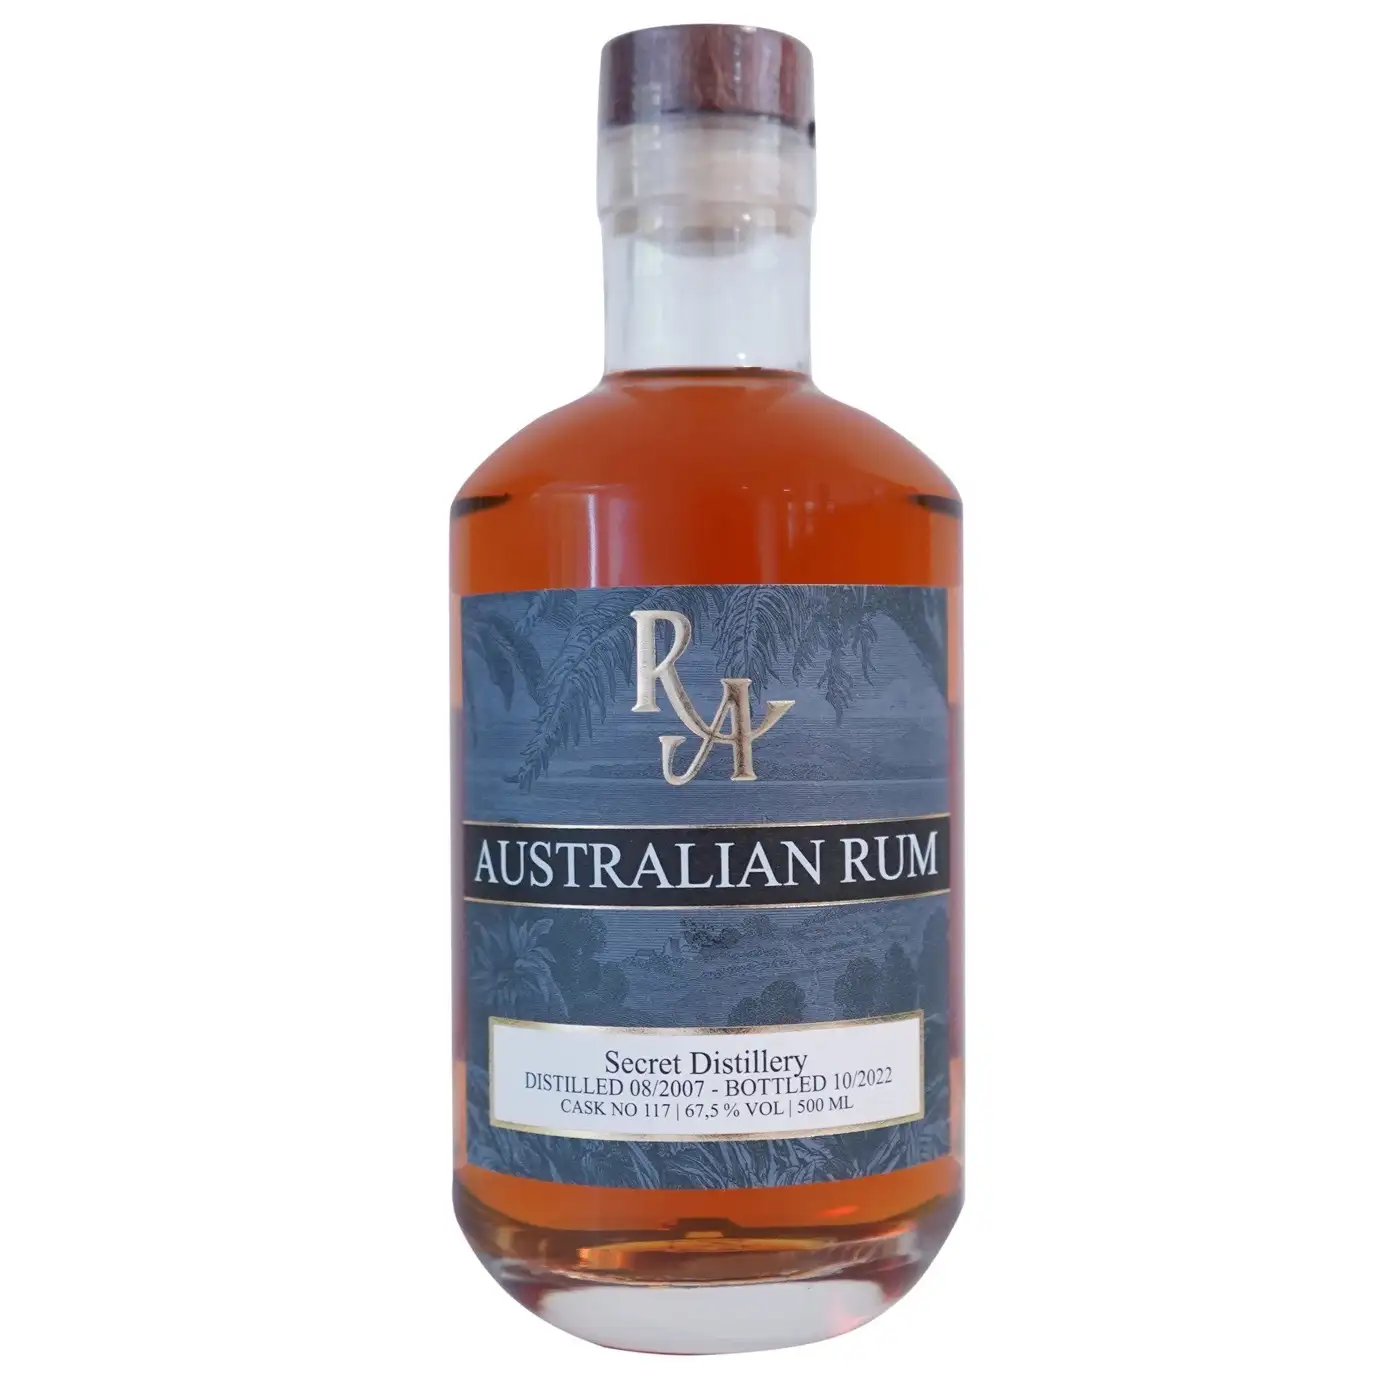 Image of the front of the bottle of the rum Rum Artesanal Australian Rum